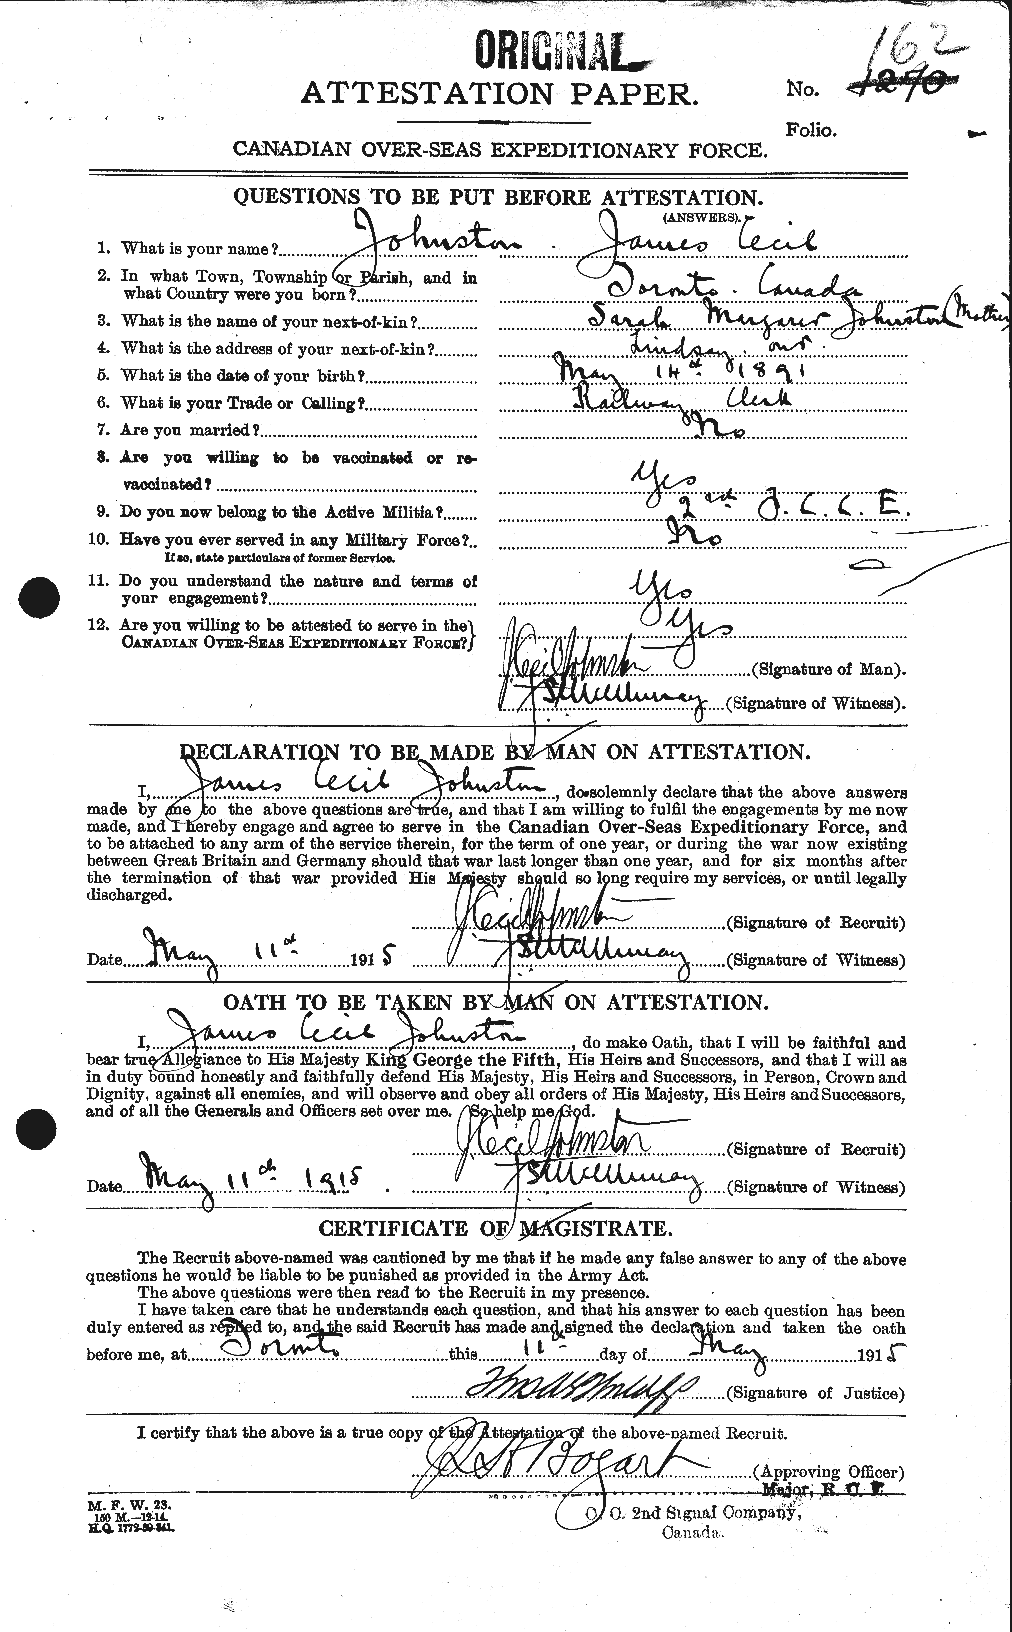 Personnel Records of the First World War - CEF 422725a